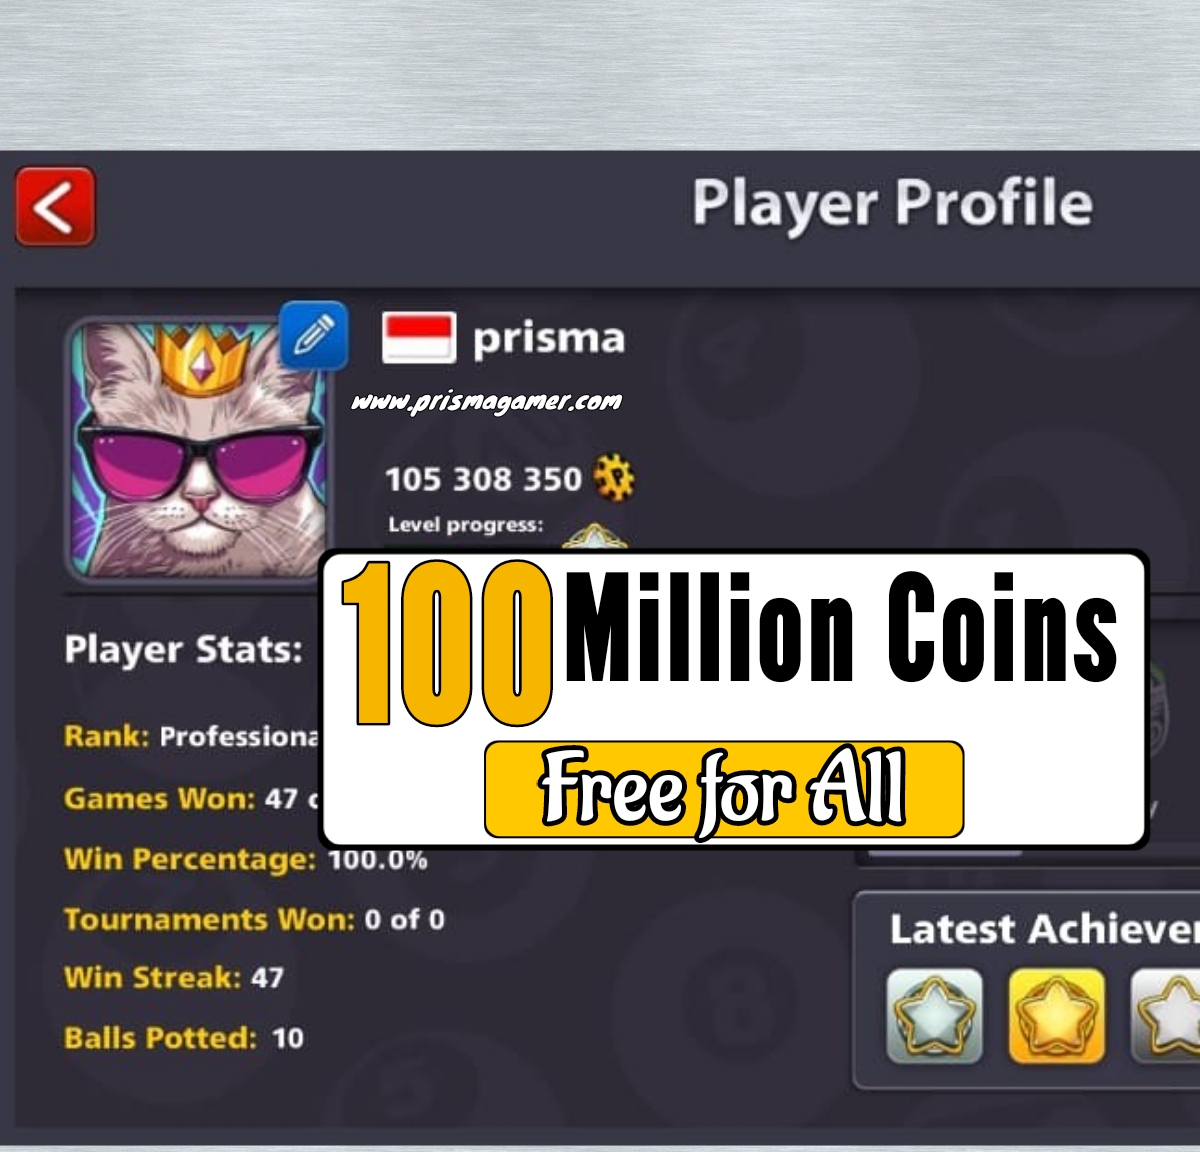 8 Ball Pool Coins For Free 100 Million 10 Accounts Giveaway